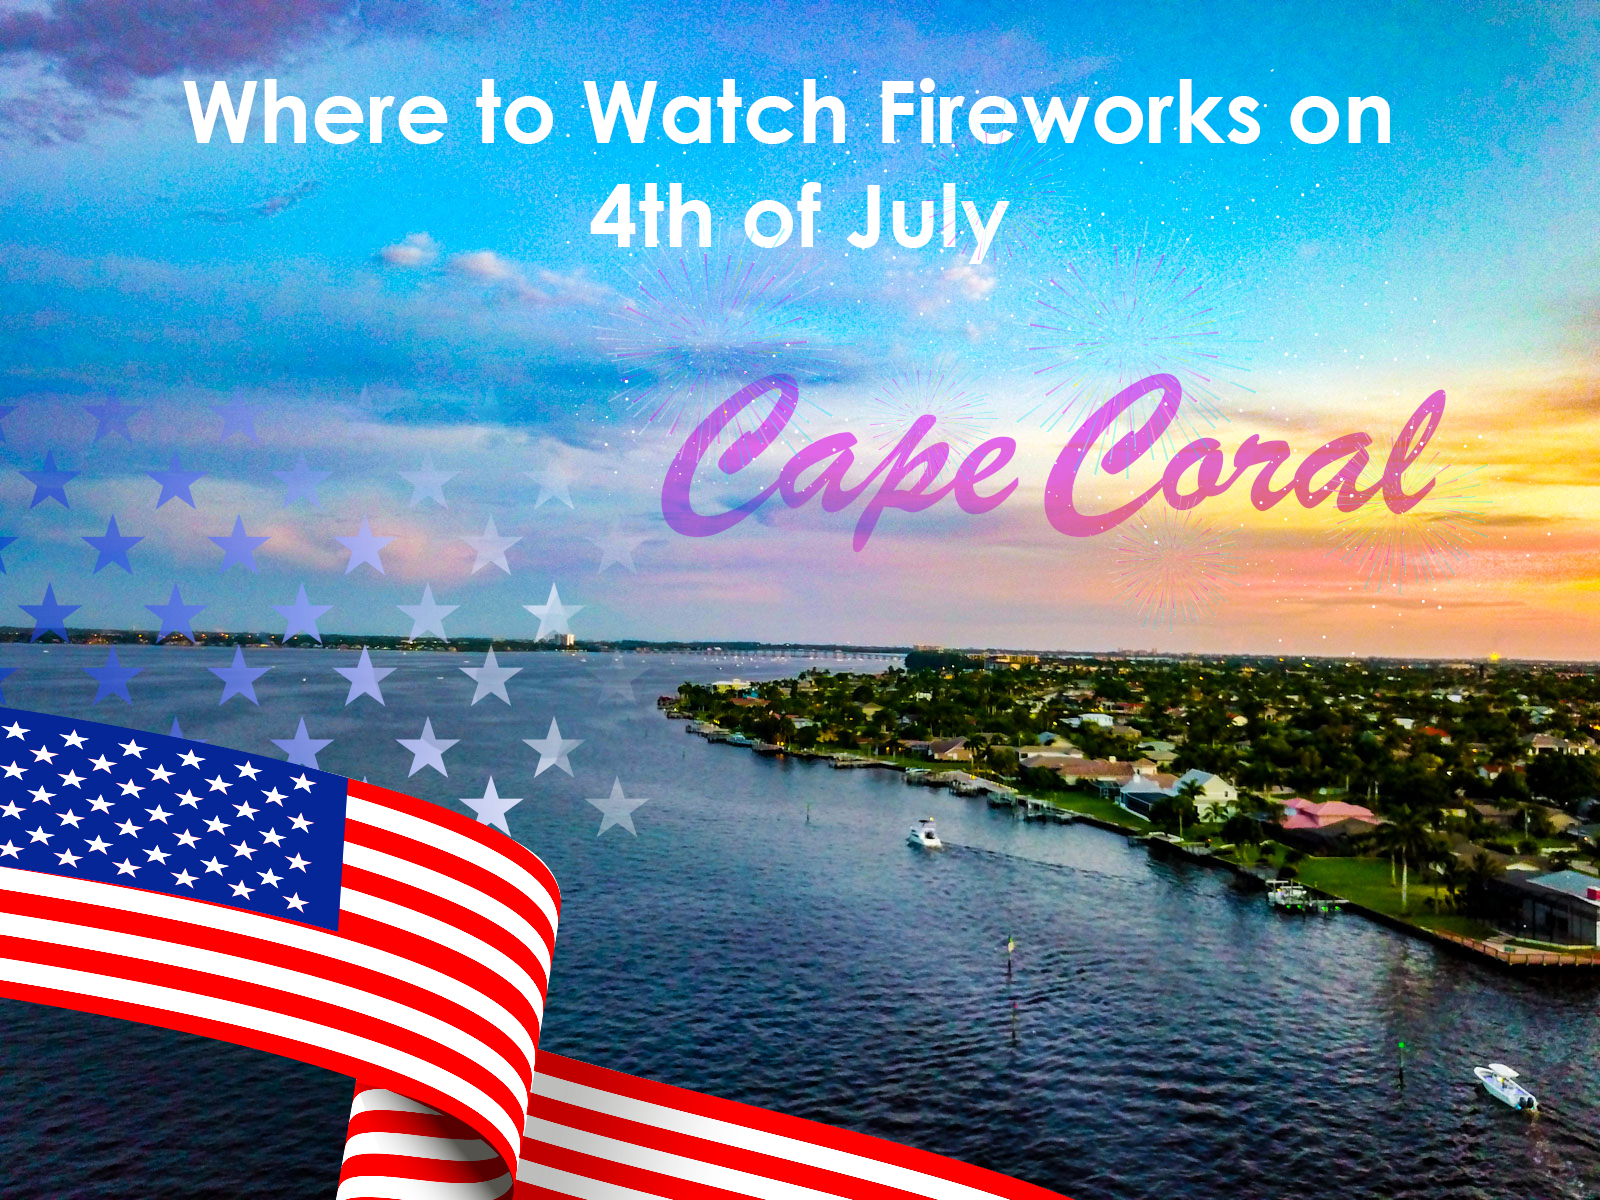 Where to Watch Fireworks on 4th of July in Cape Coral